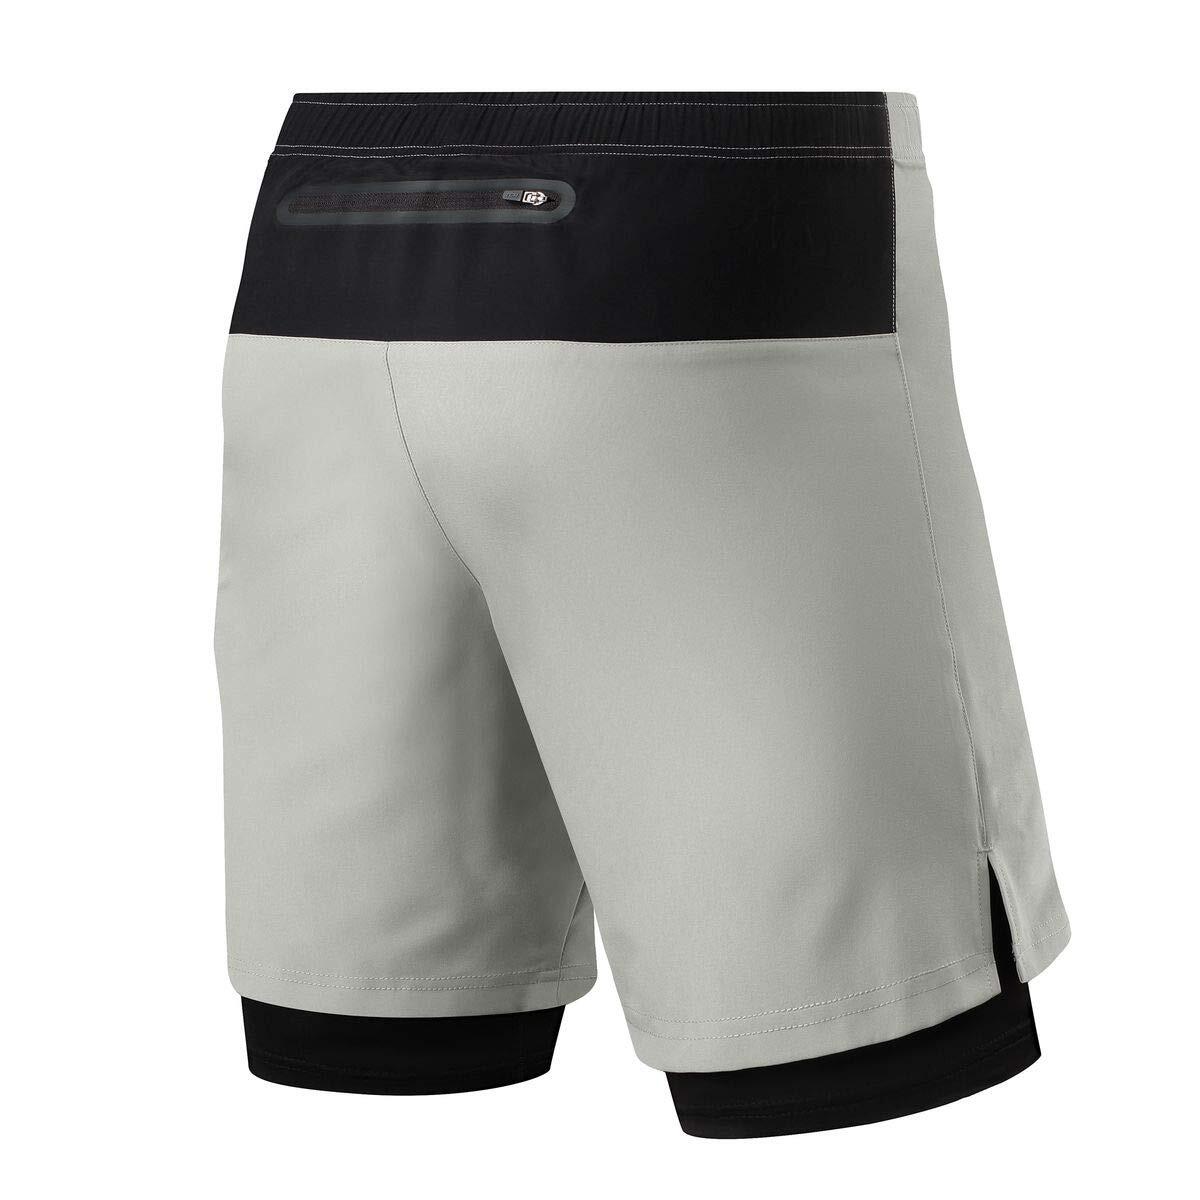 Men's Ultra 2-in-1 Running Shorts with Key Pocket - Cool Grey/Black 2/5